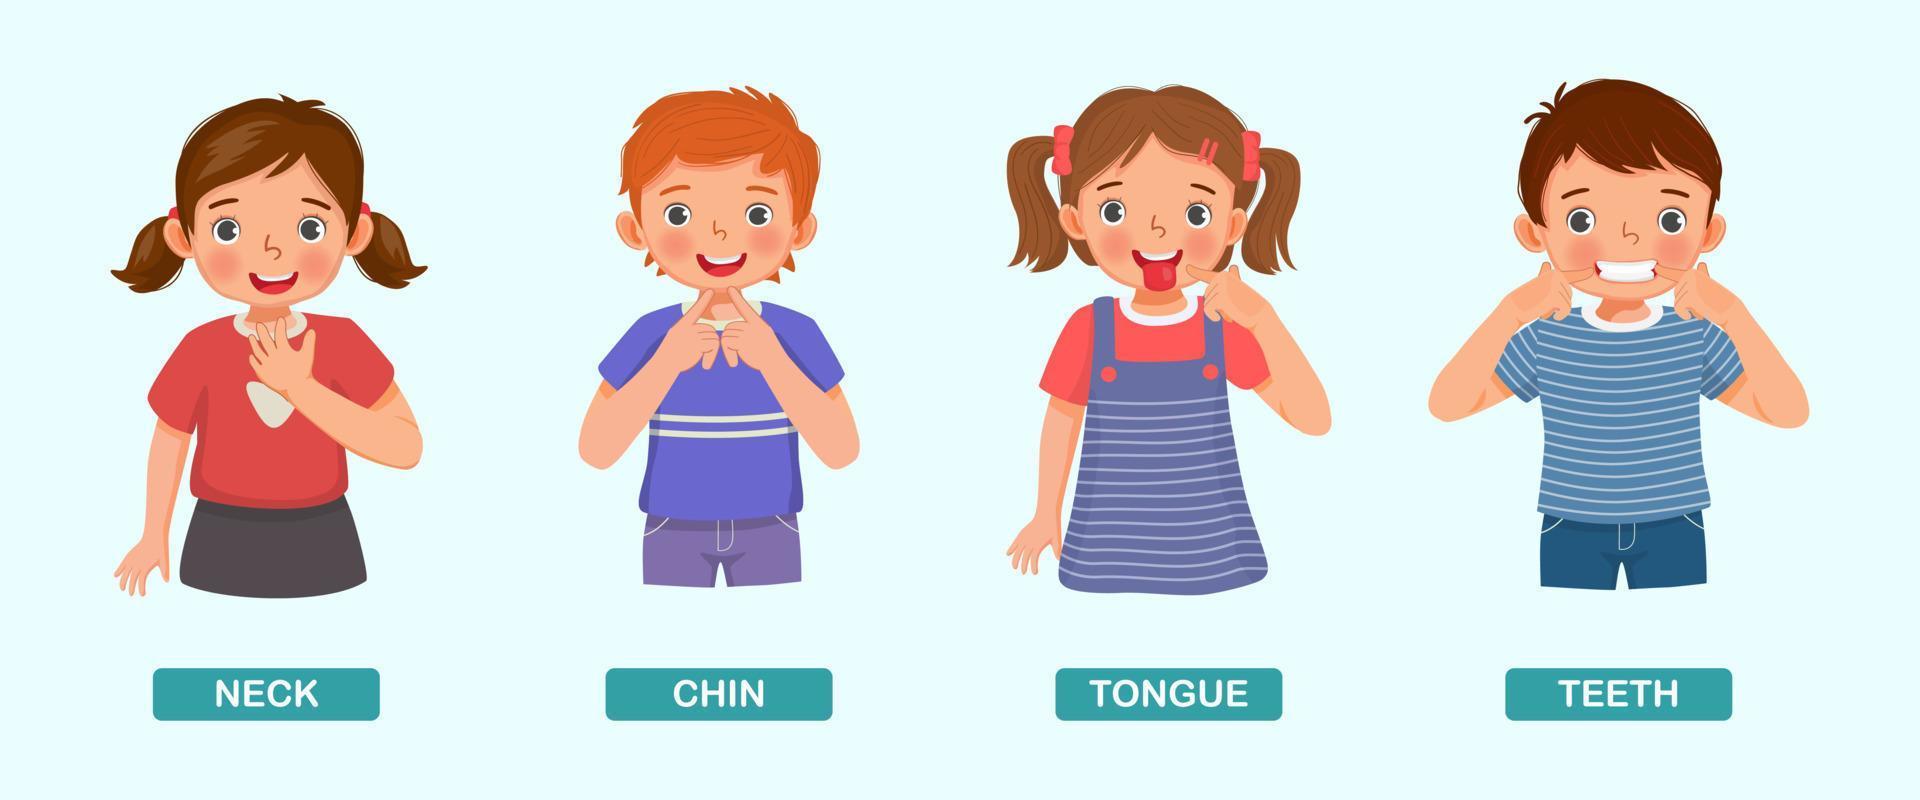 cute kids showing by pointing different body parts of human anatomy such as neck, chin, tongue, teeth vector